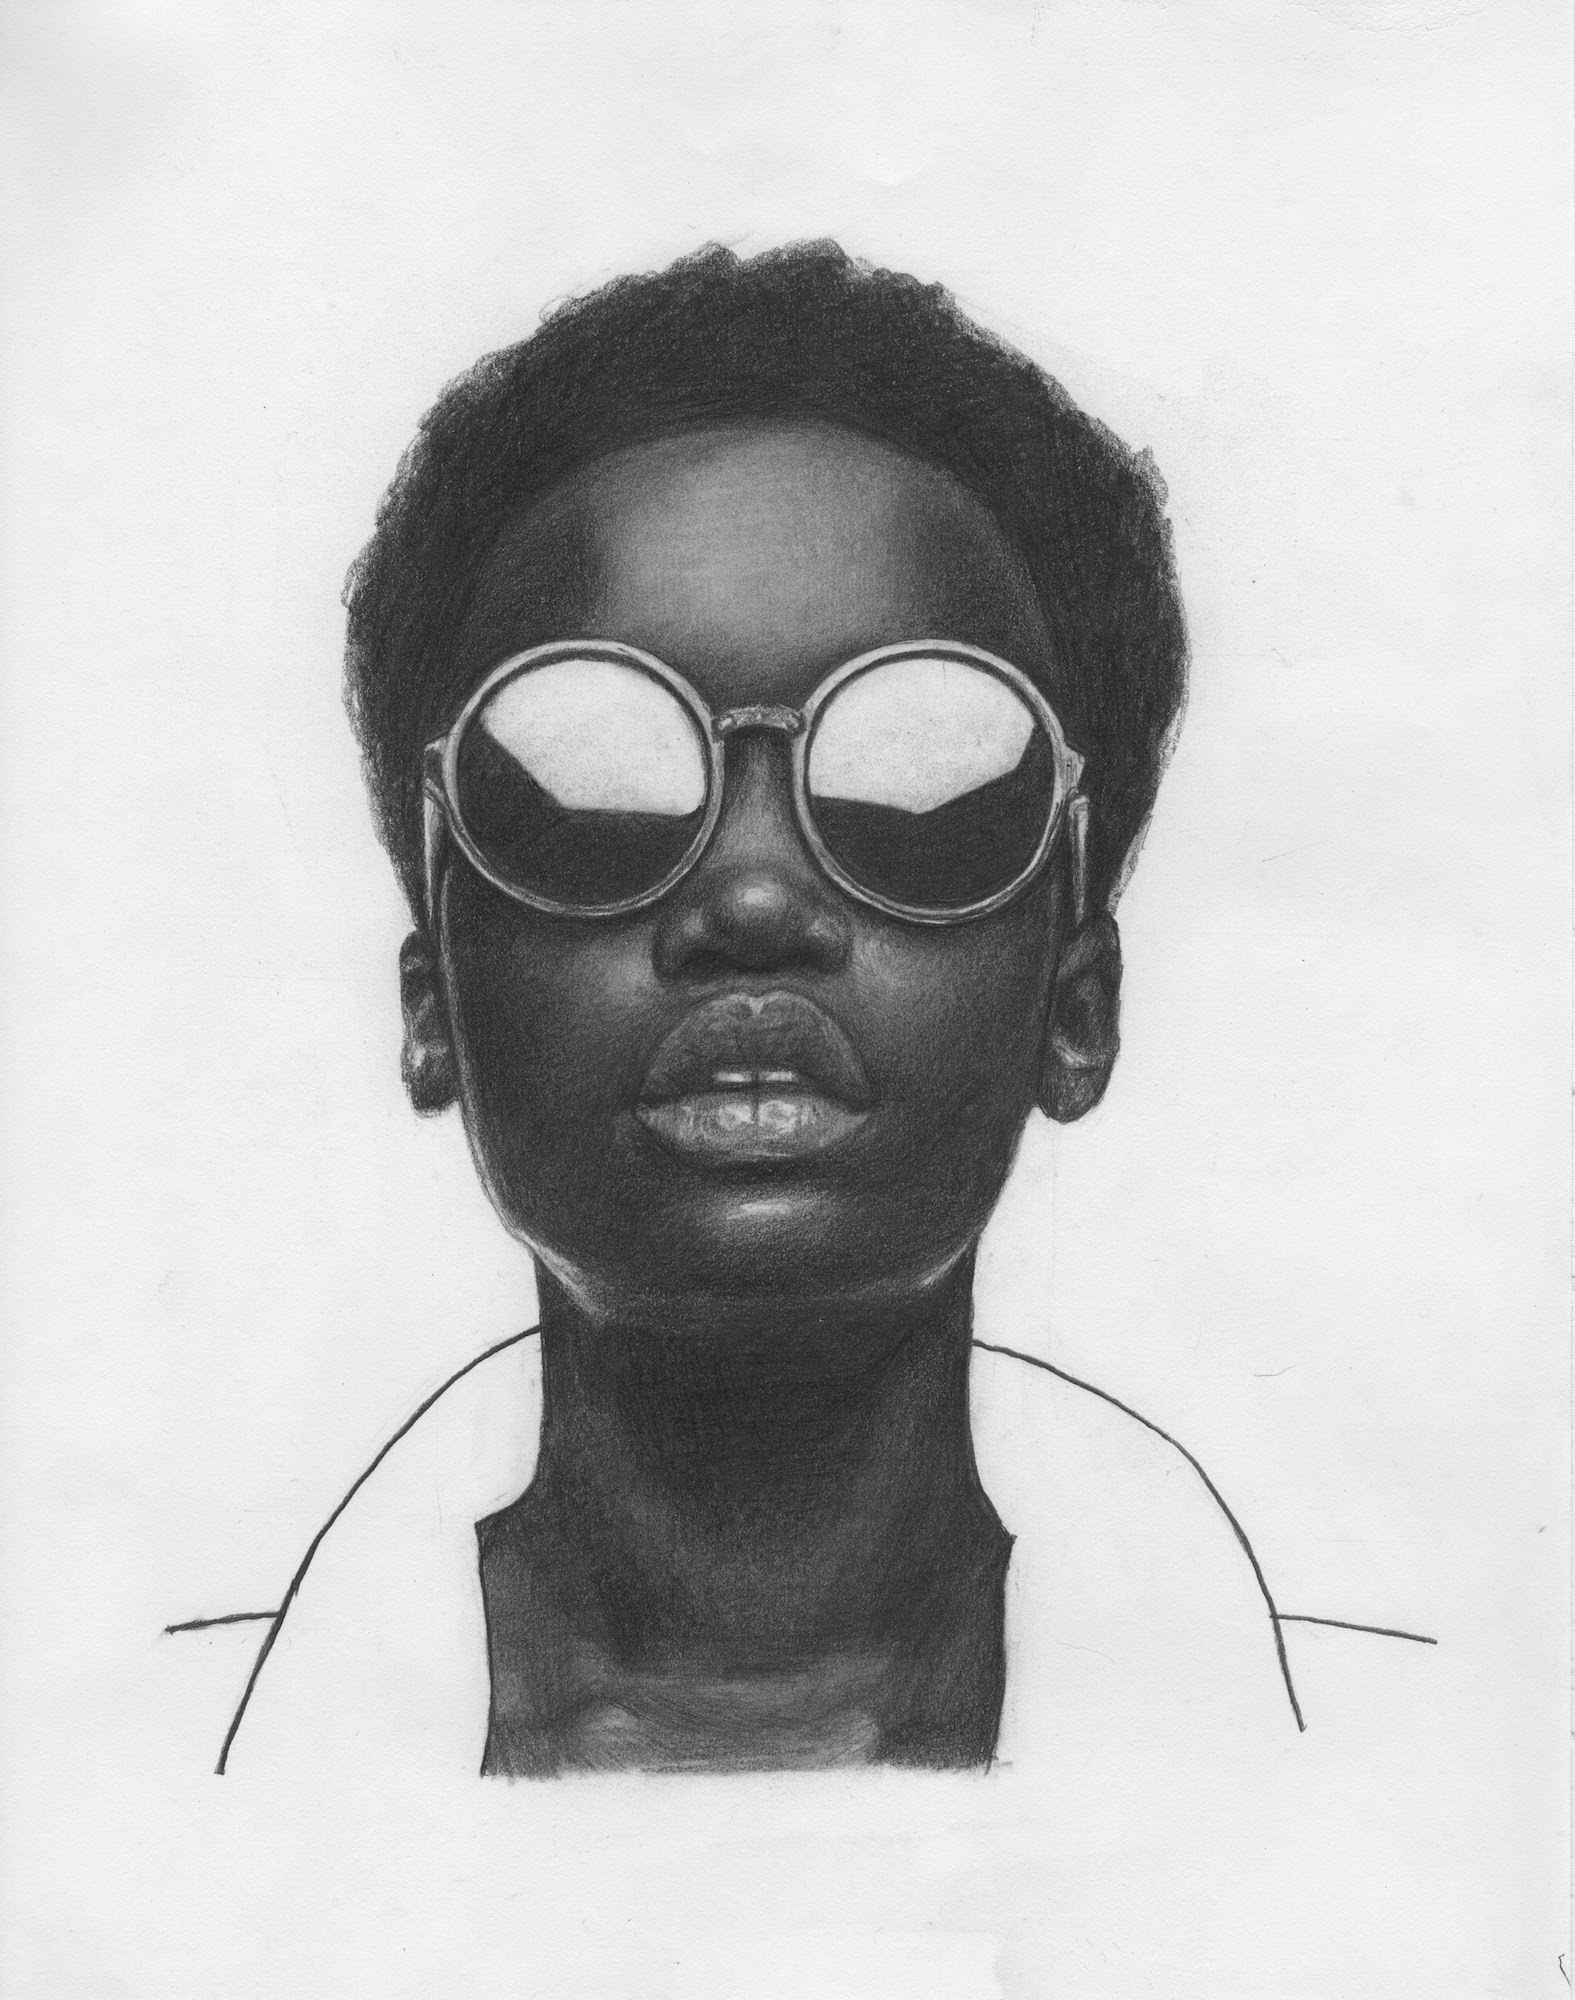 Pencil portrait drawing of a woman with sunglasses on